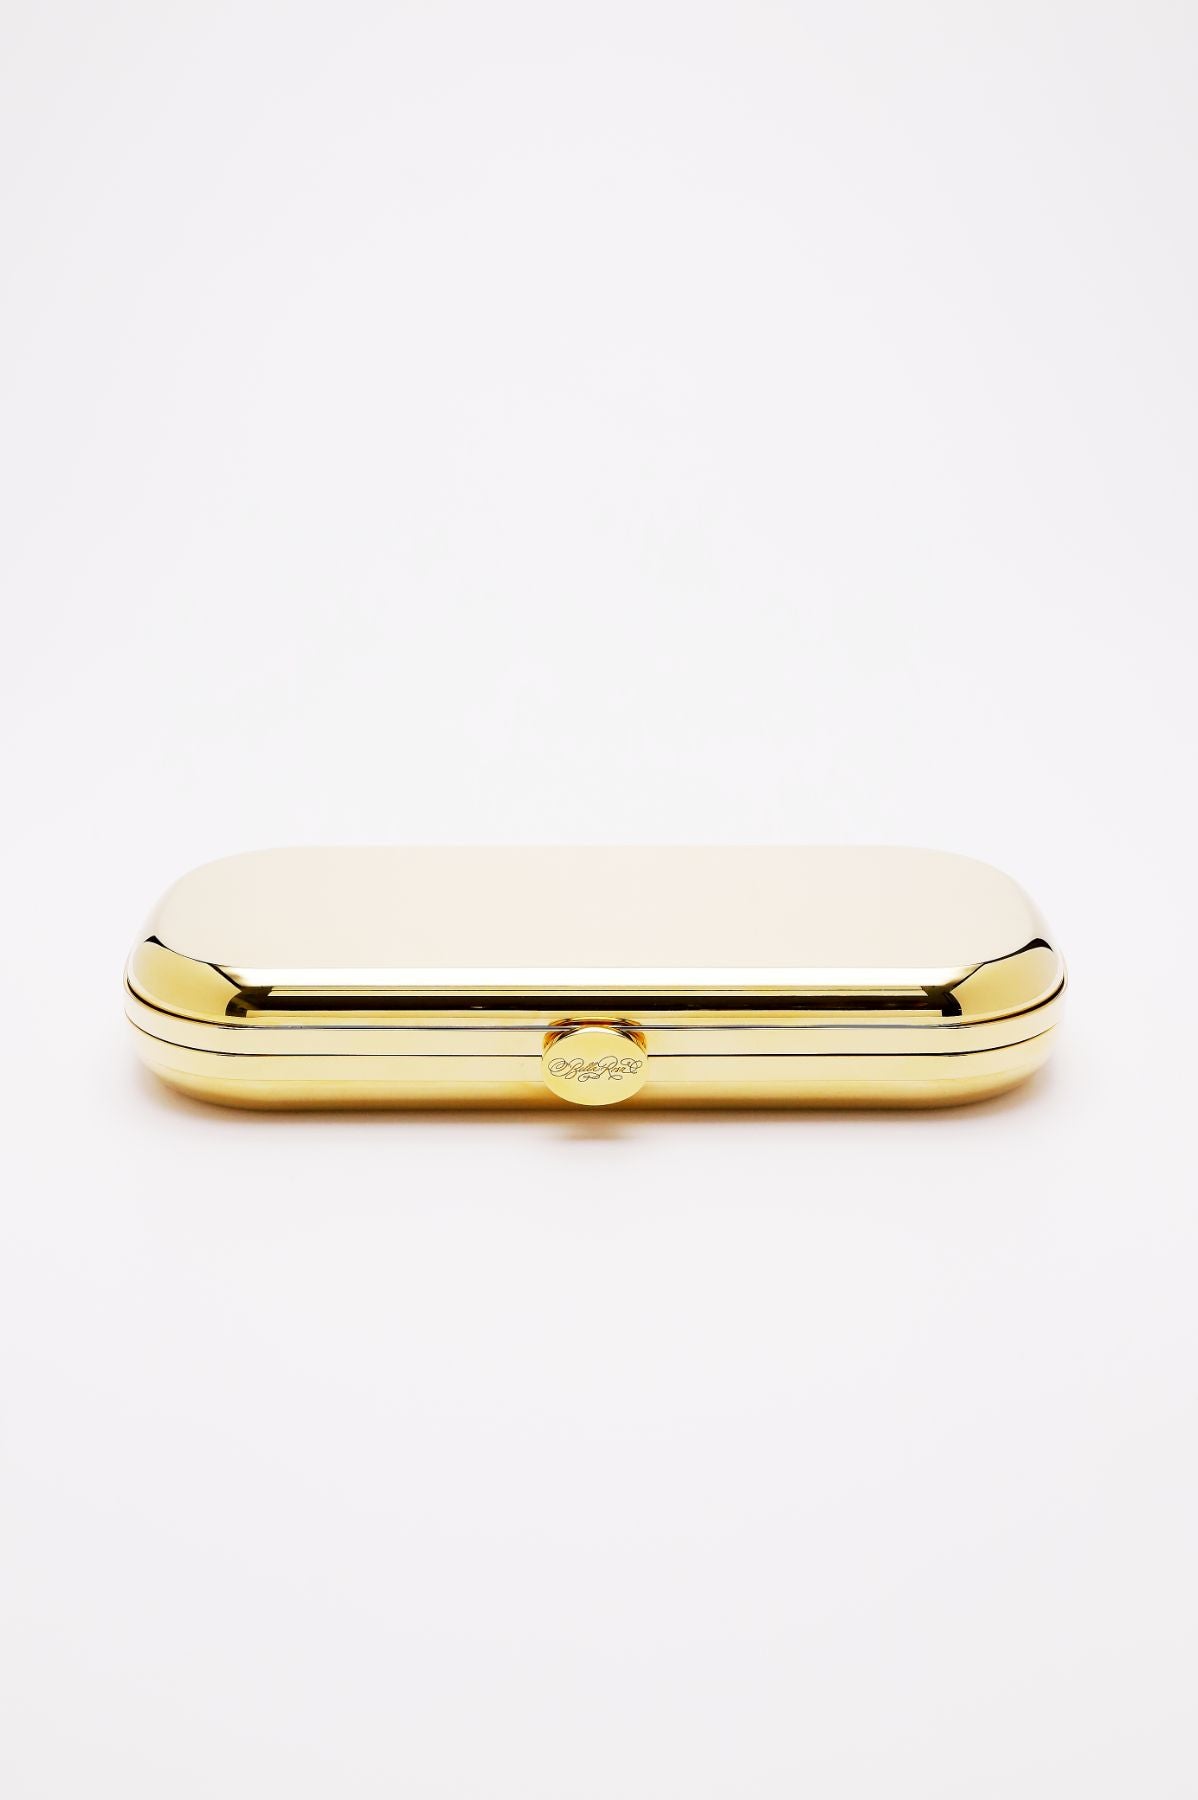 The Bella Rosa Collection Bella Clutch Golden Petite with an engraved sentiment plaque on a white background.